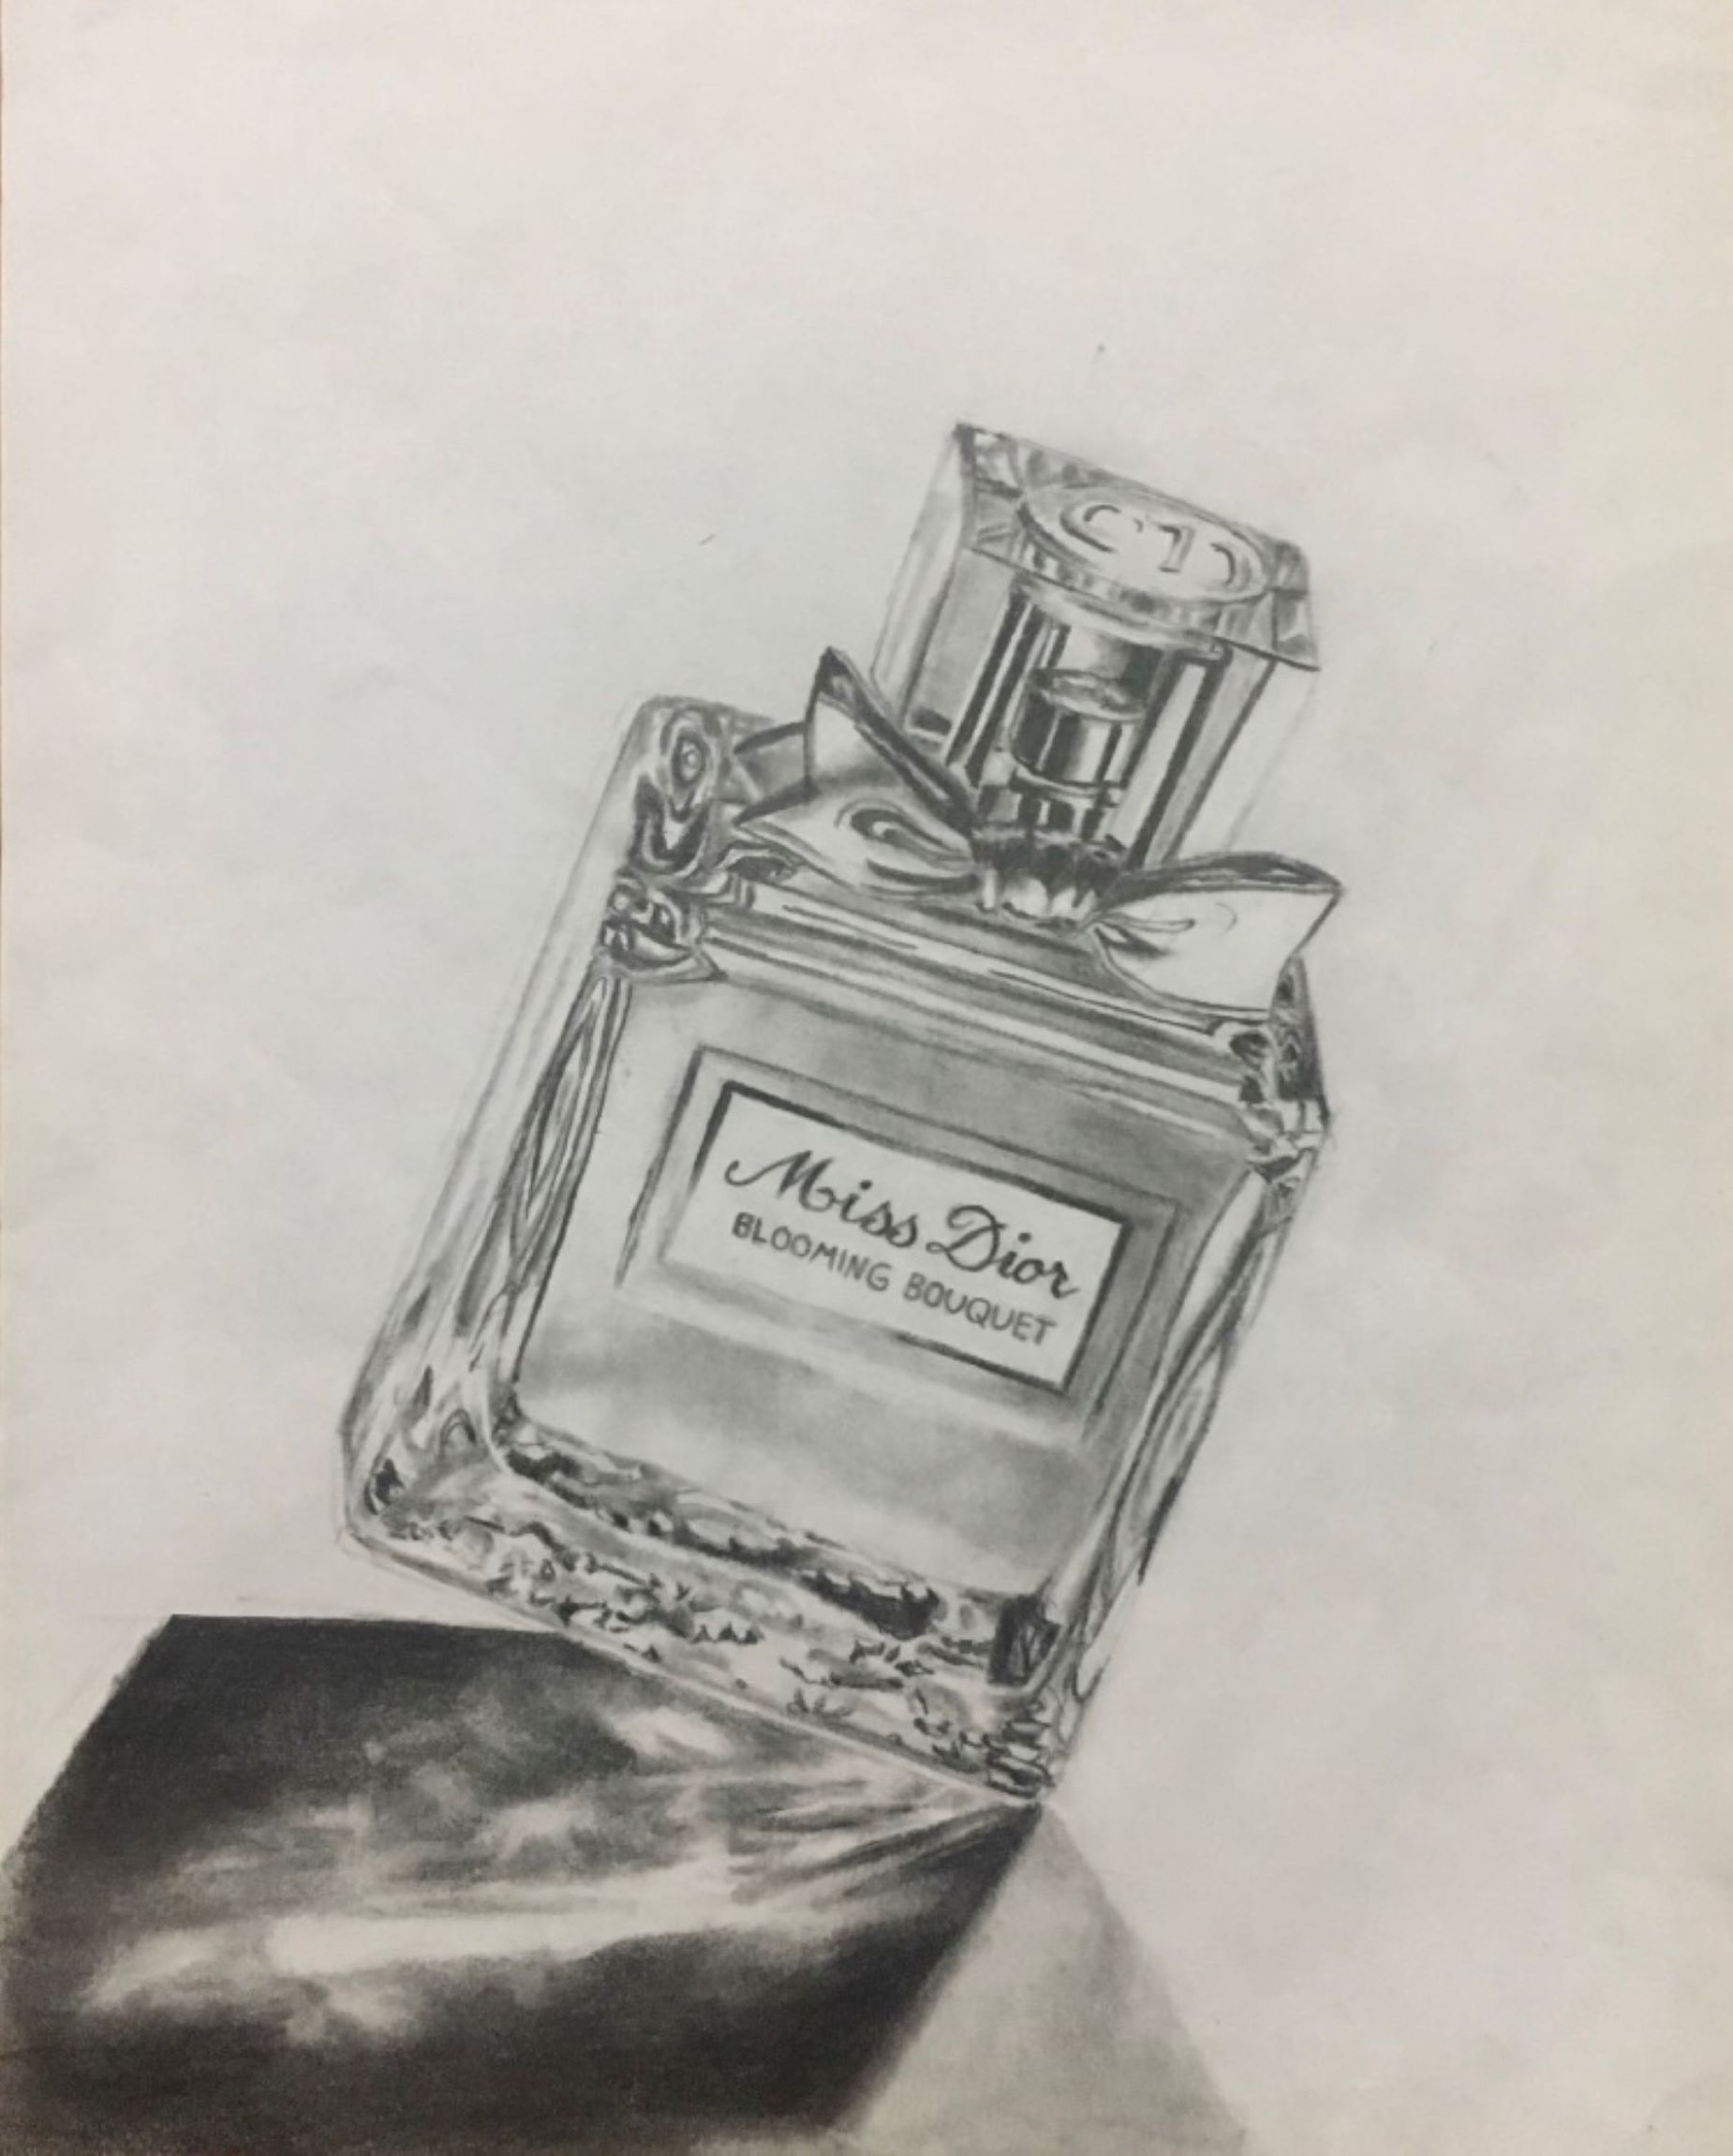 Pictured: An illustration of ab ottle of Miss Dior perfume and its shadow.